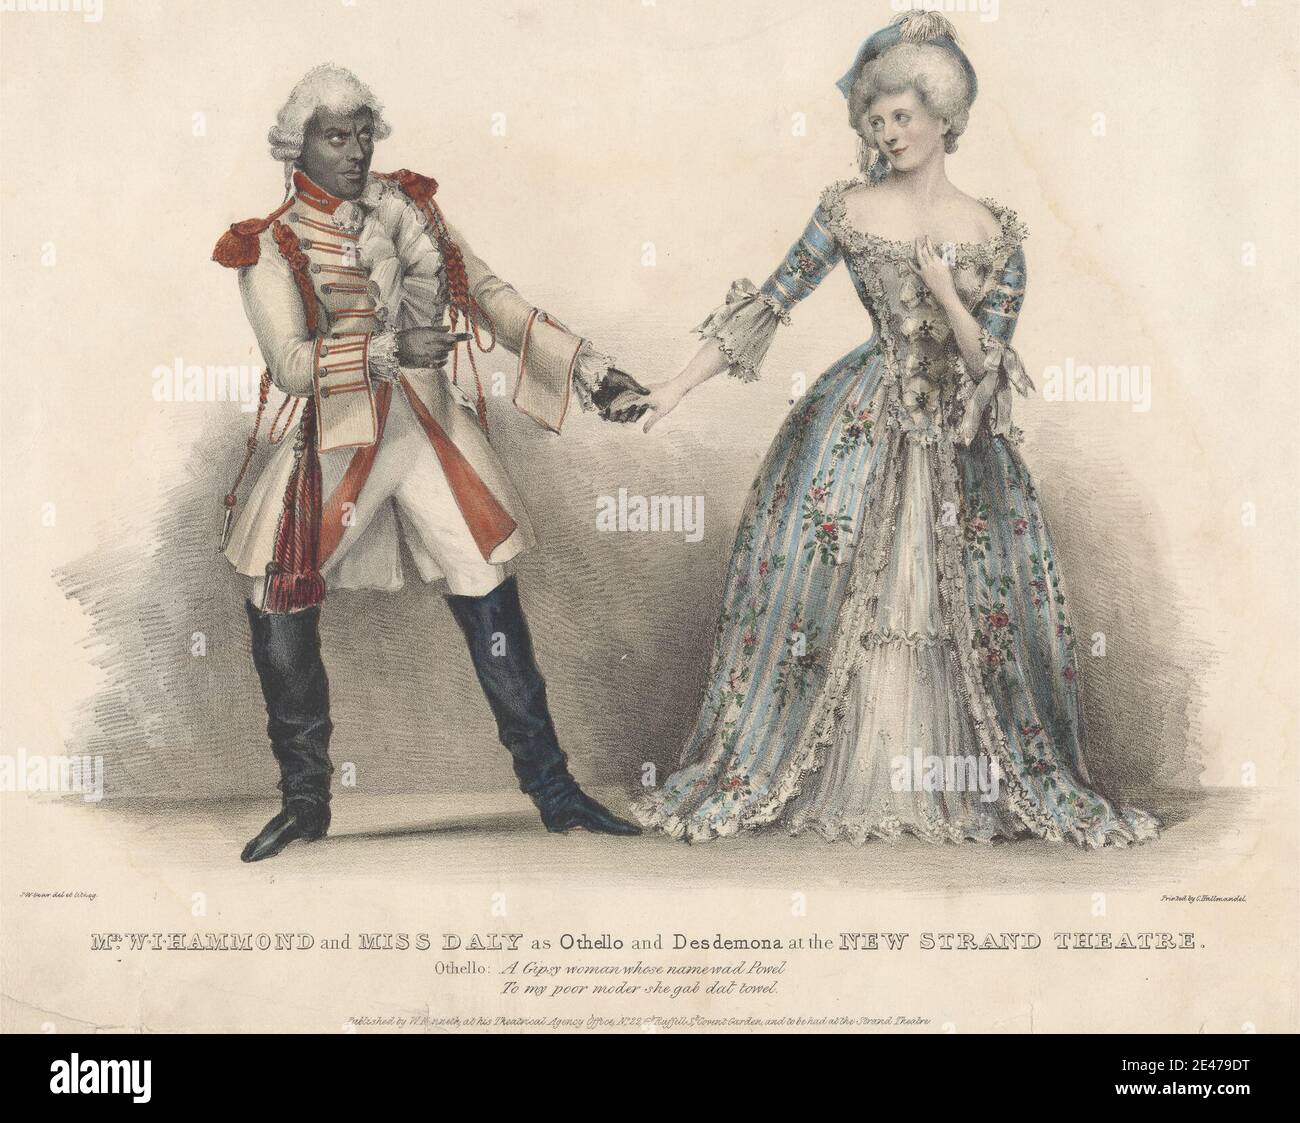 Print made by John W. Gear, 1806–1866, Mr. W. J. Hammond and Miss Daly as Othello and Desdemona at the New Strand Theatre, undated. Lithograph with watercolor on moderately thick, slightly textured, cream wove paper.   actor , actress , boots , costume , dress , gesturing , husband , literary theme , lovers , play , plays by William Shakespeare , tassels , The Tragedy of Othello, the Moor of Venice, play by William Shakespeare , theater , wife , wigs. Hammond, William John (1797x9-1848), actor and theater manager Shakespeare, William (1564–1616), playwright and poet Othello (character in Othel Stock Photo